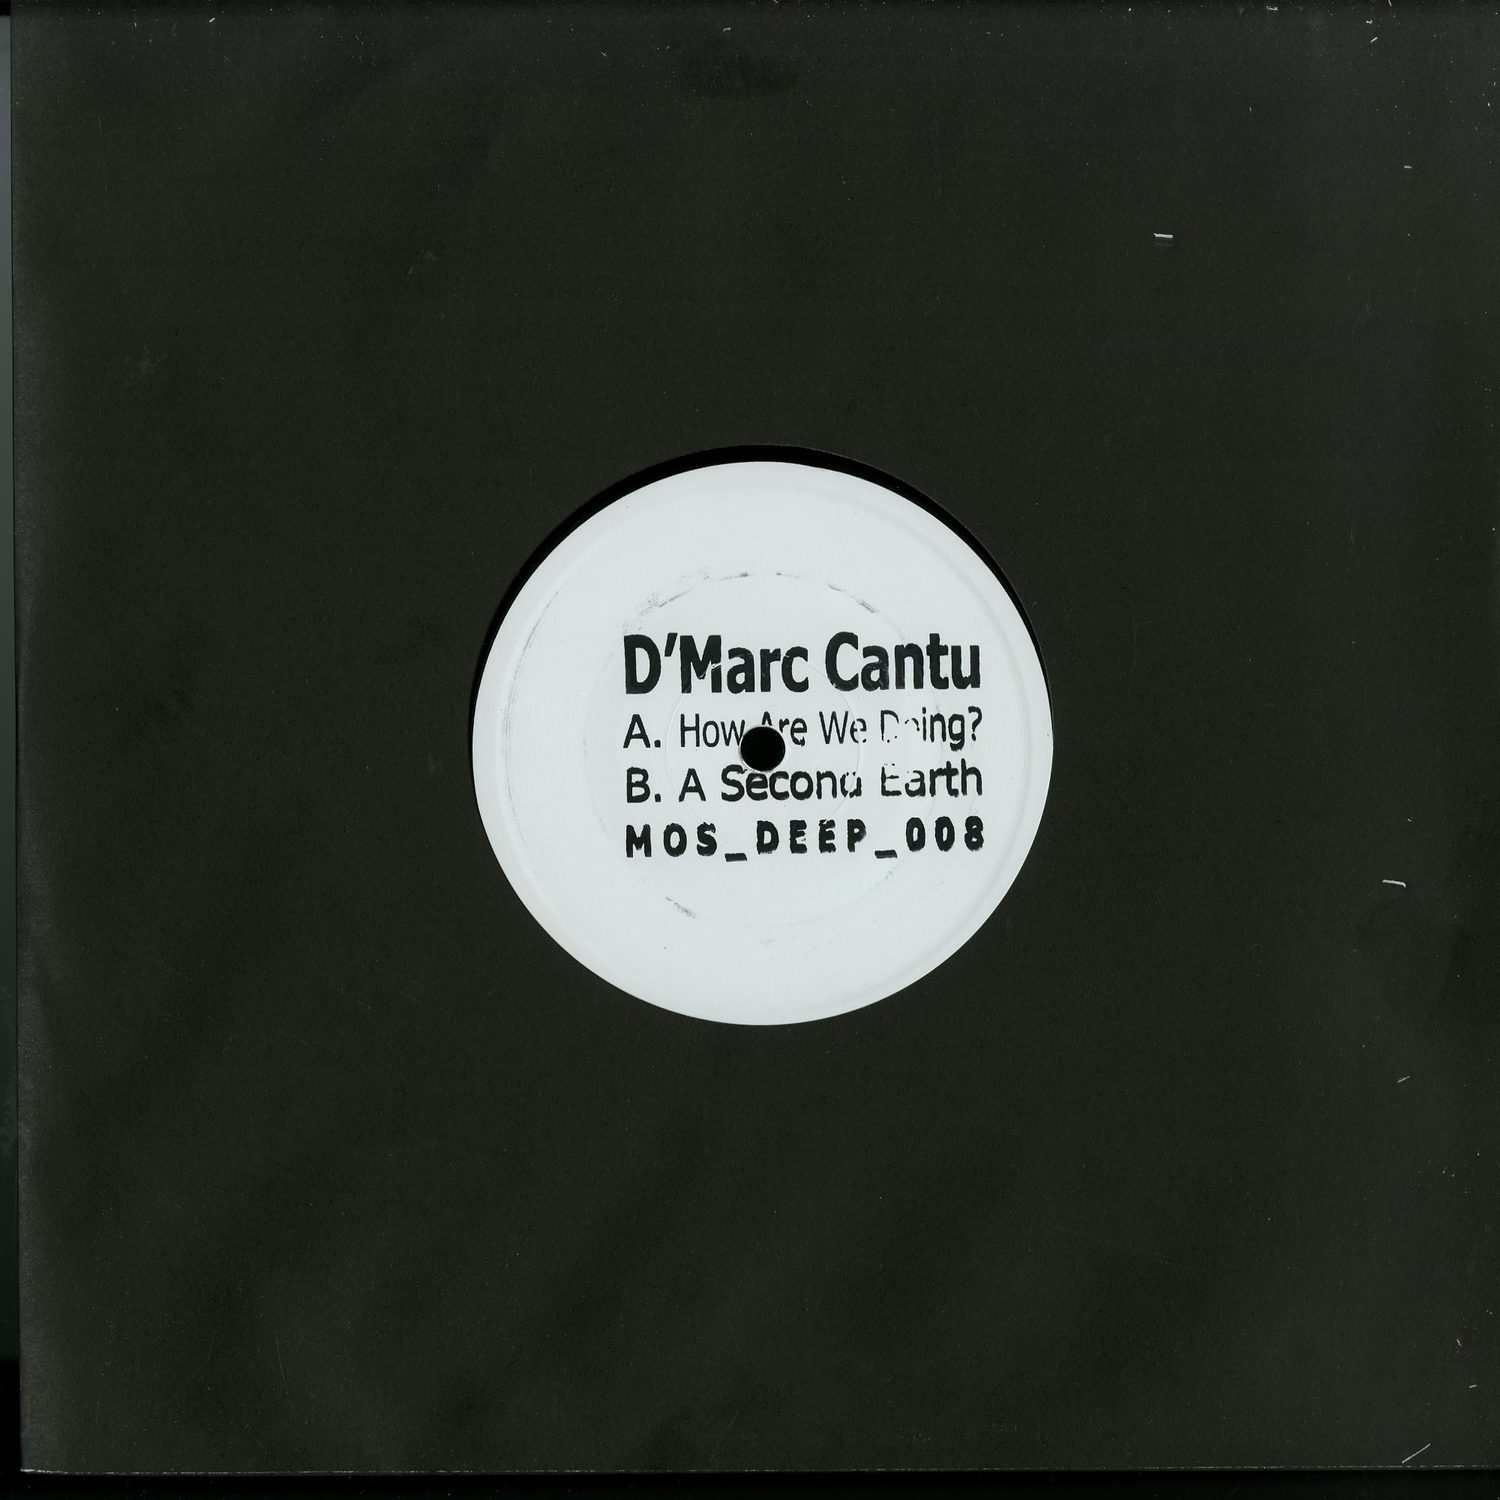 D Marc Cantu - HOW ARE WE DOING / A SECOND EARTH 